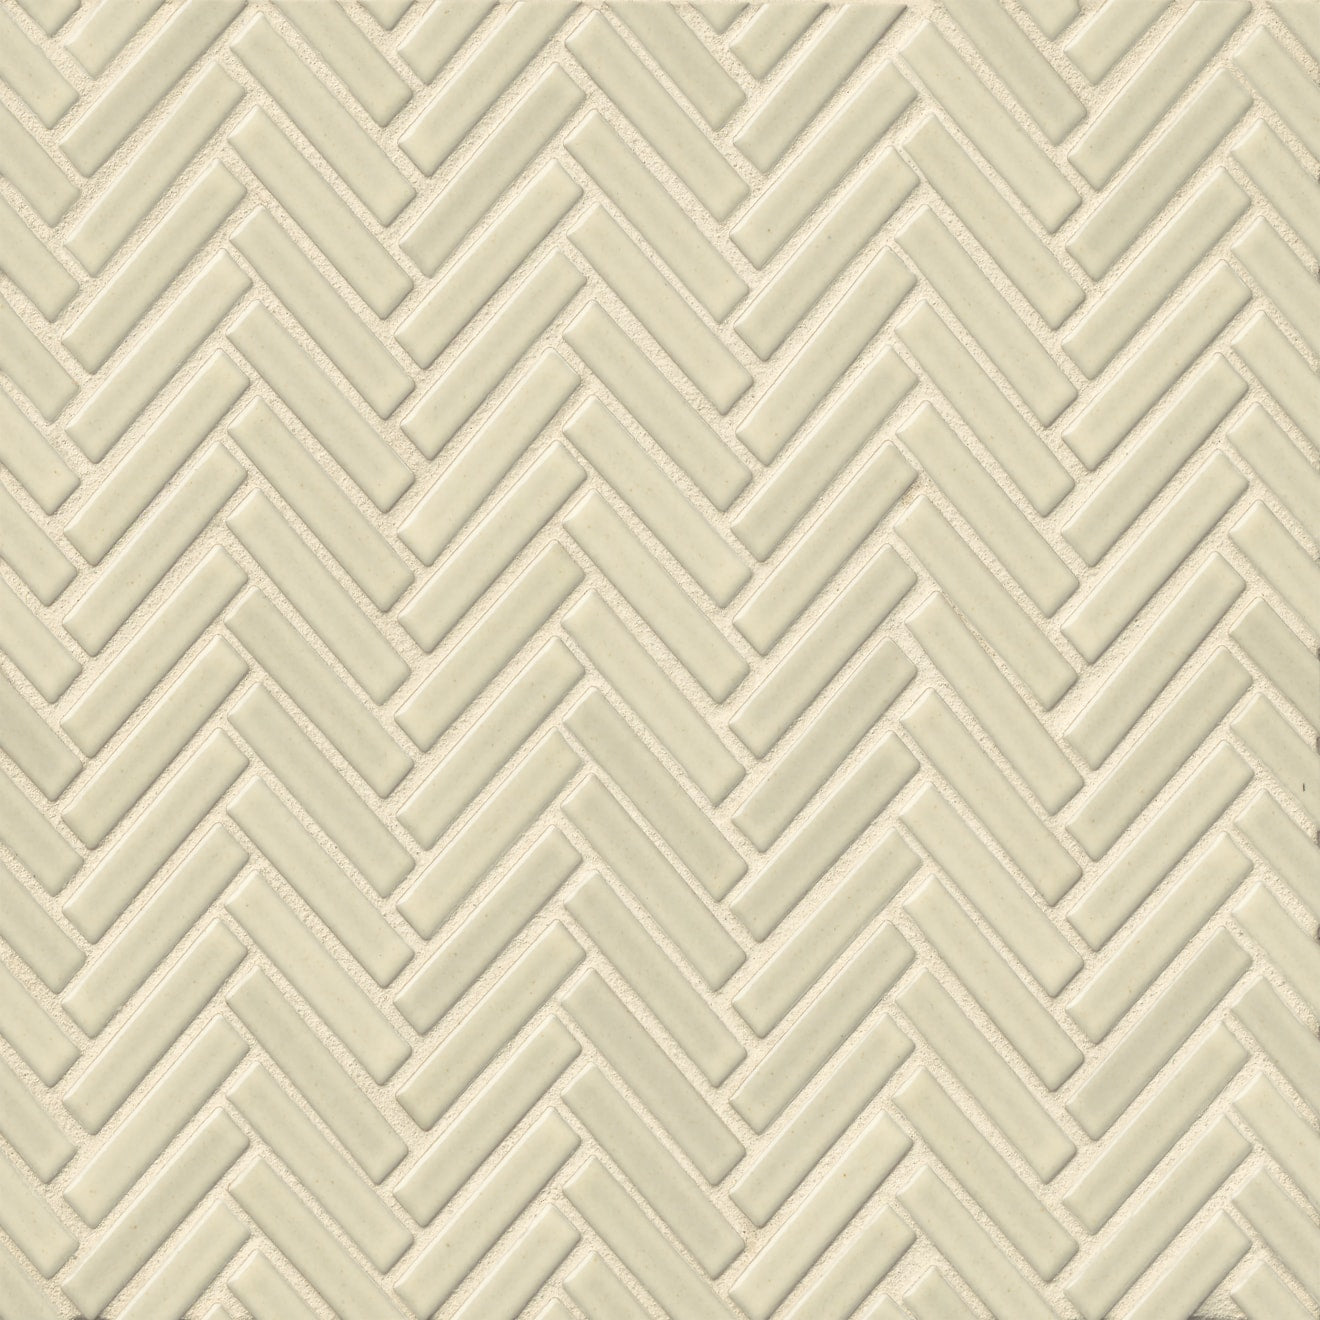 Herringbone tile in the color Off White on a neutral background. 